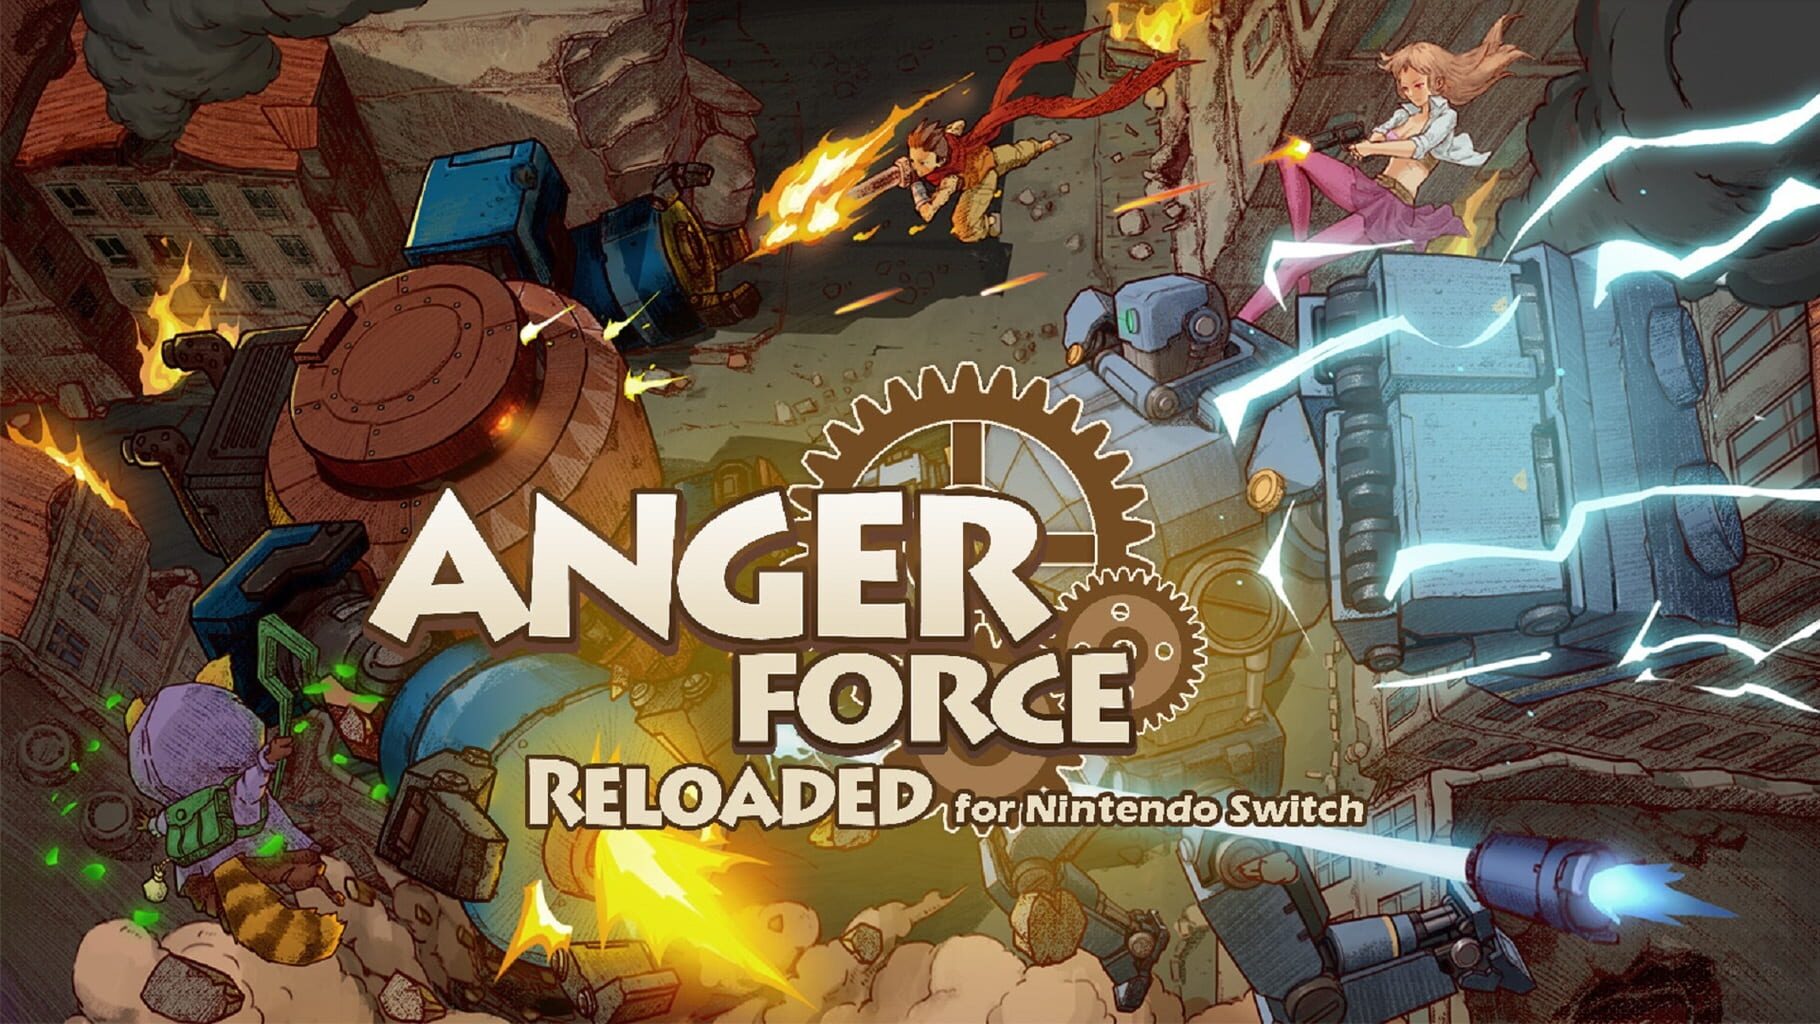 AngerForce: Reloaded for Nintendo Switch artwork